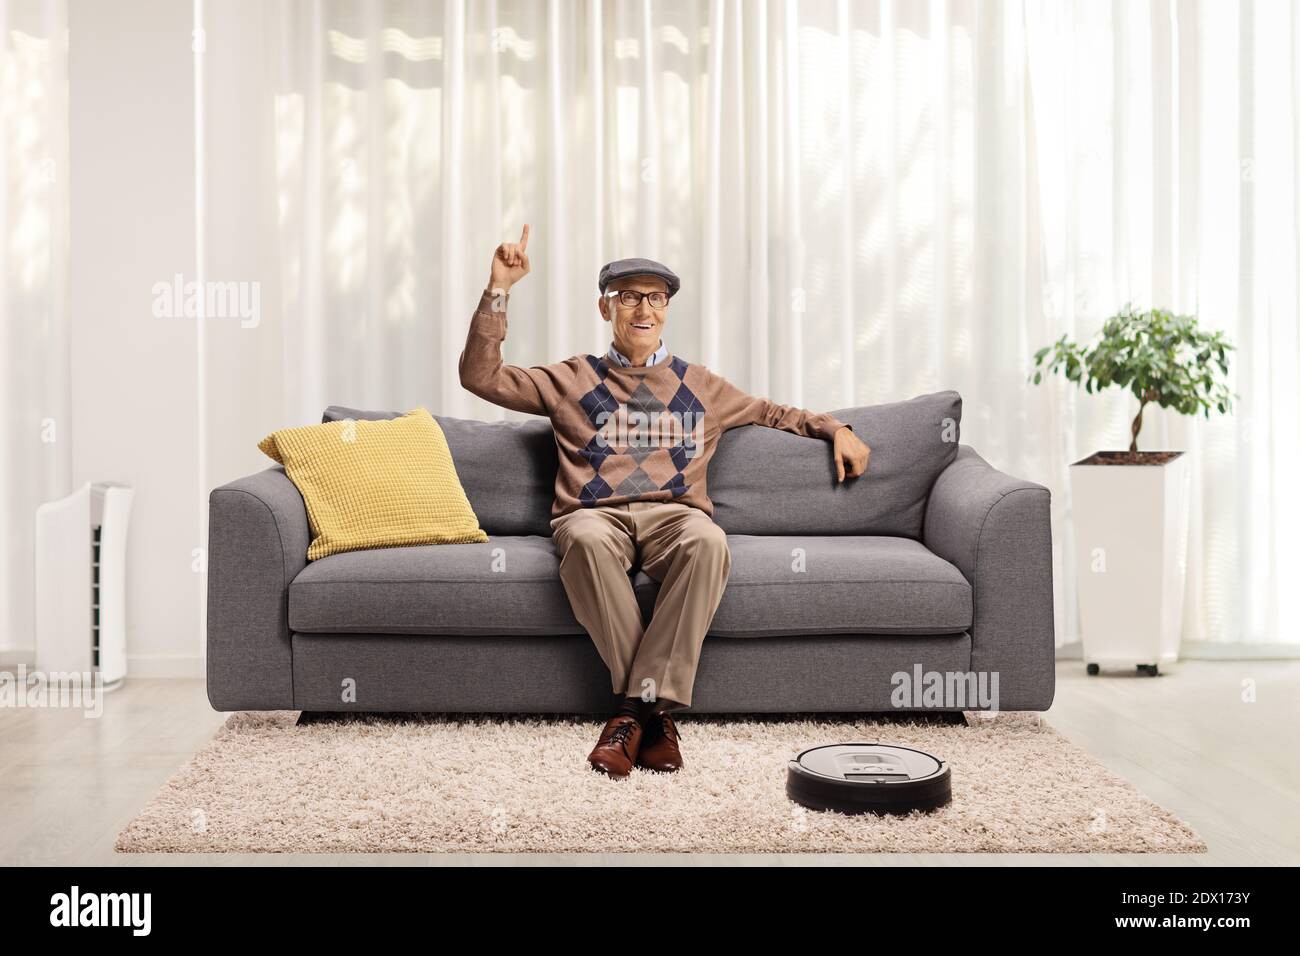 Smiling elderly man sitting on a sofa at home, pointing up and a robotic vacuum cleaner dusting the carpet Stock Photo